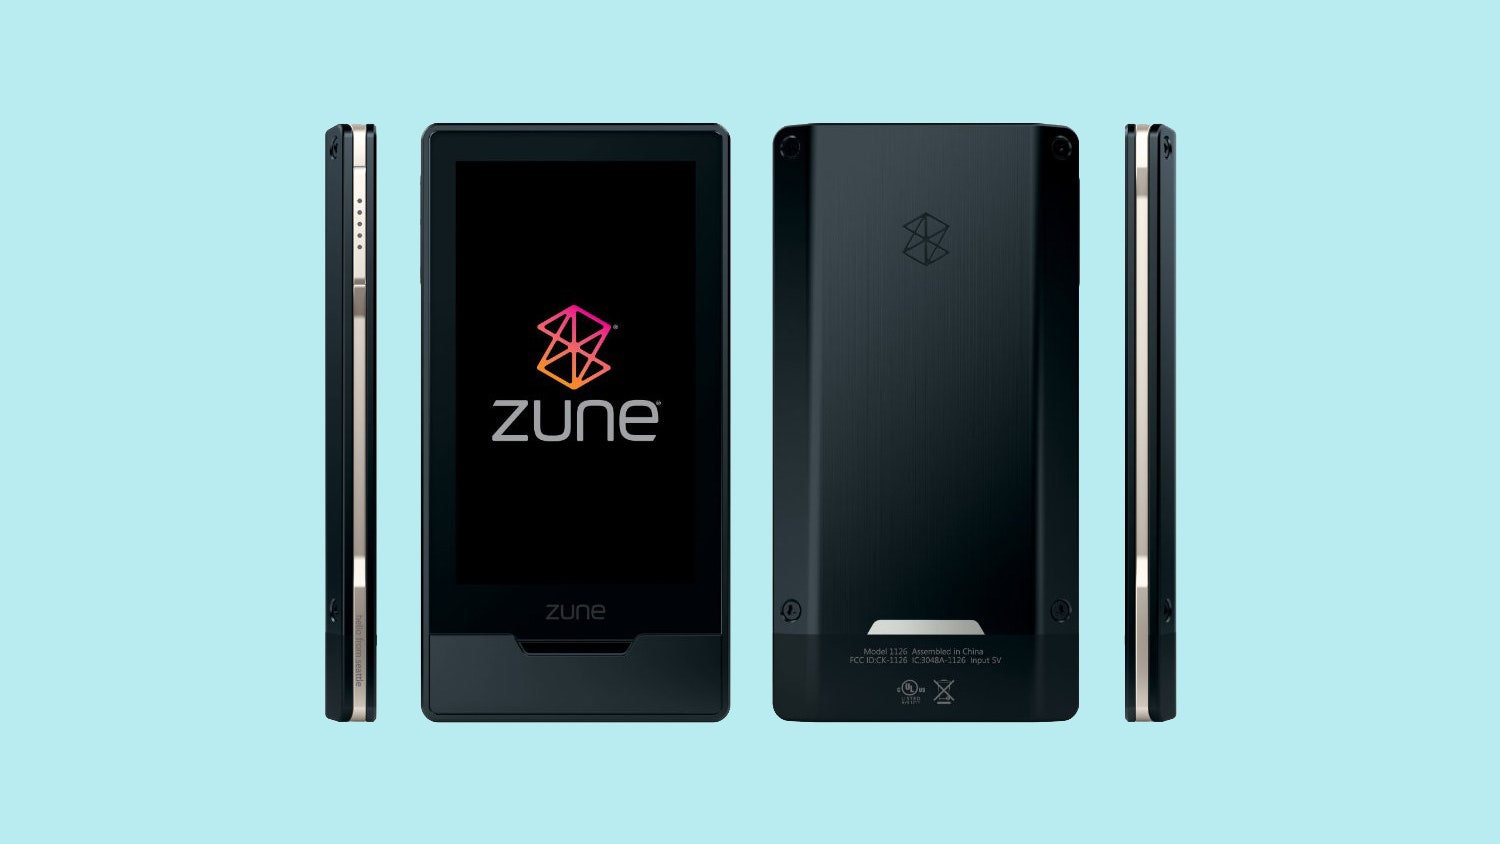 windows phone for mac no longer supports zune?